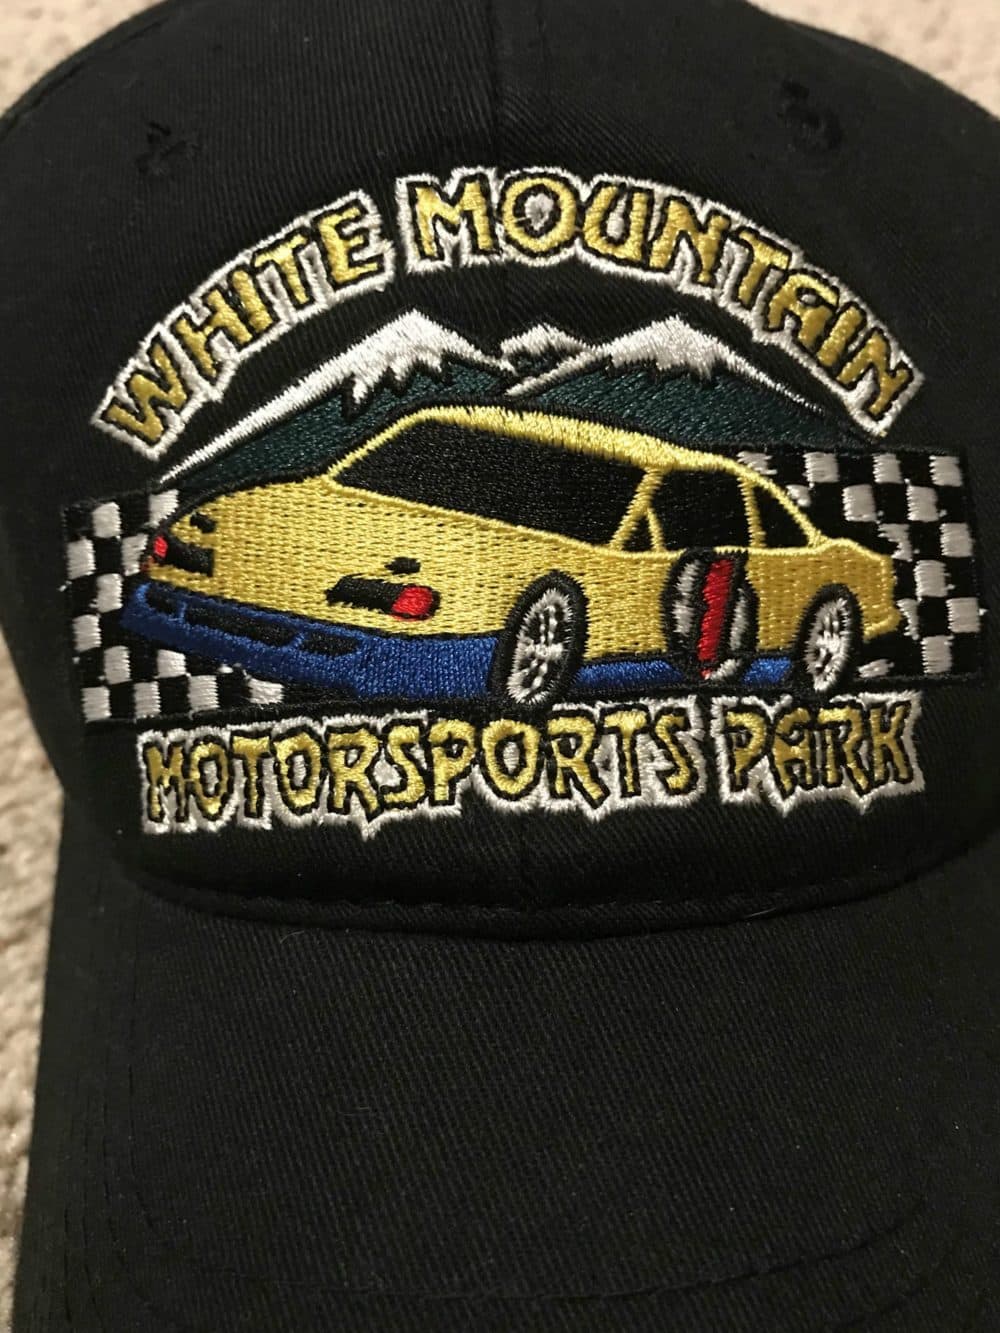 The author's new hat, purchased on a trip to watch his son race stock minis at the White Mountain Motorsports Park in New Hampshire. (Courtesy)